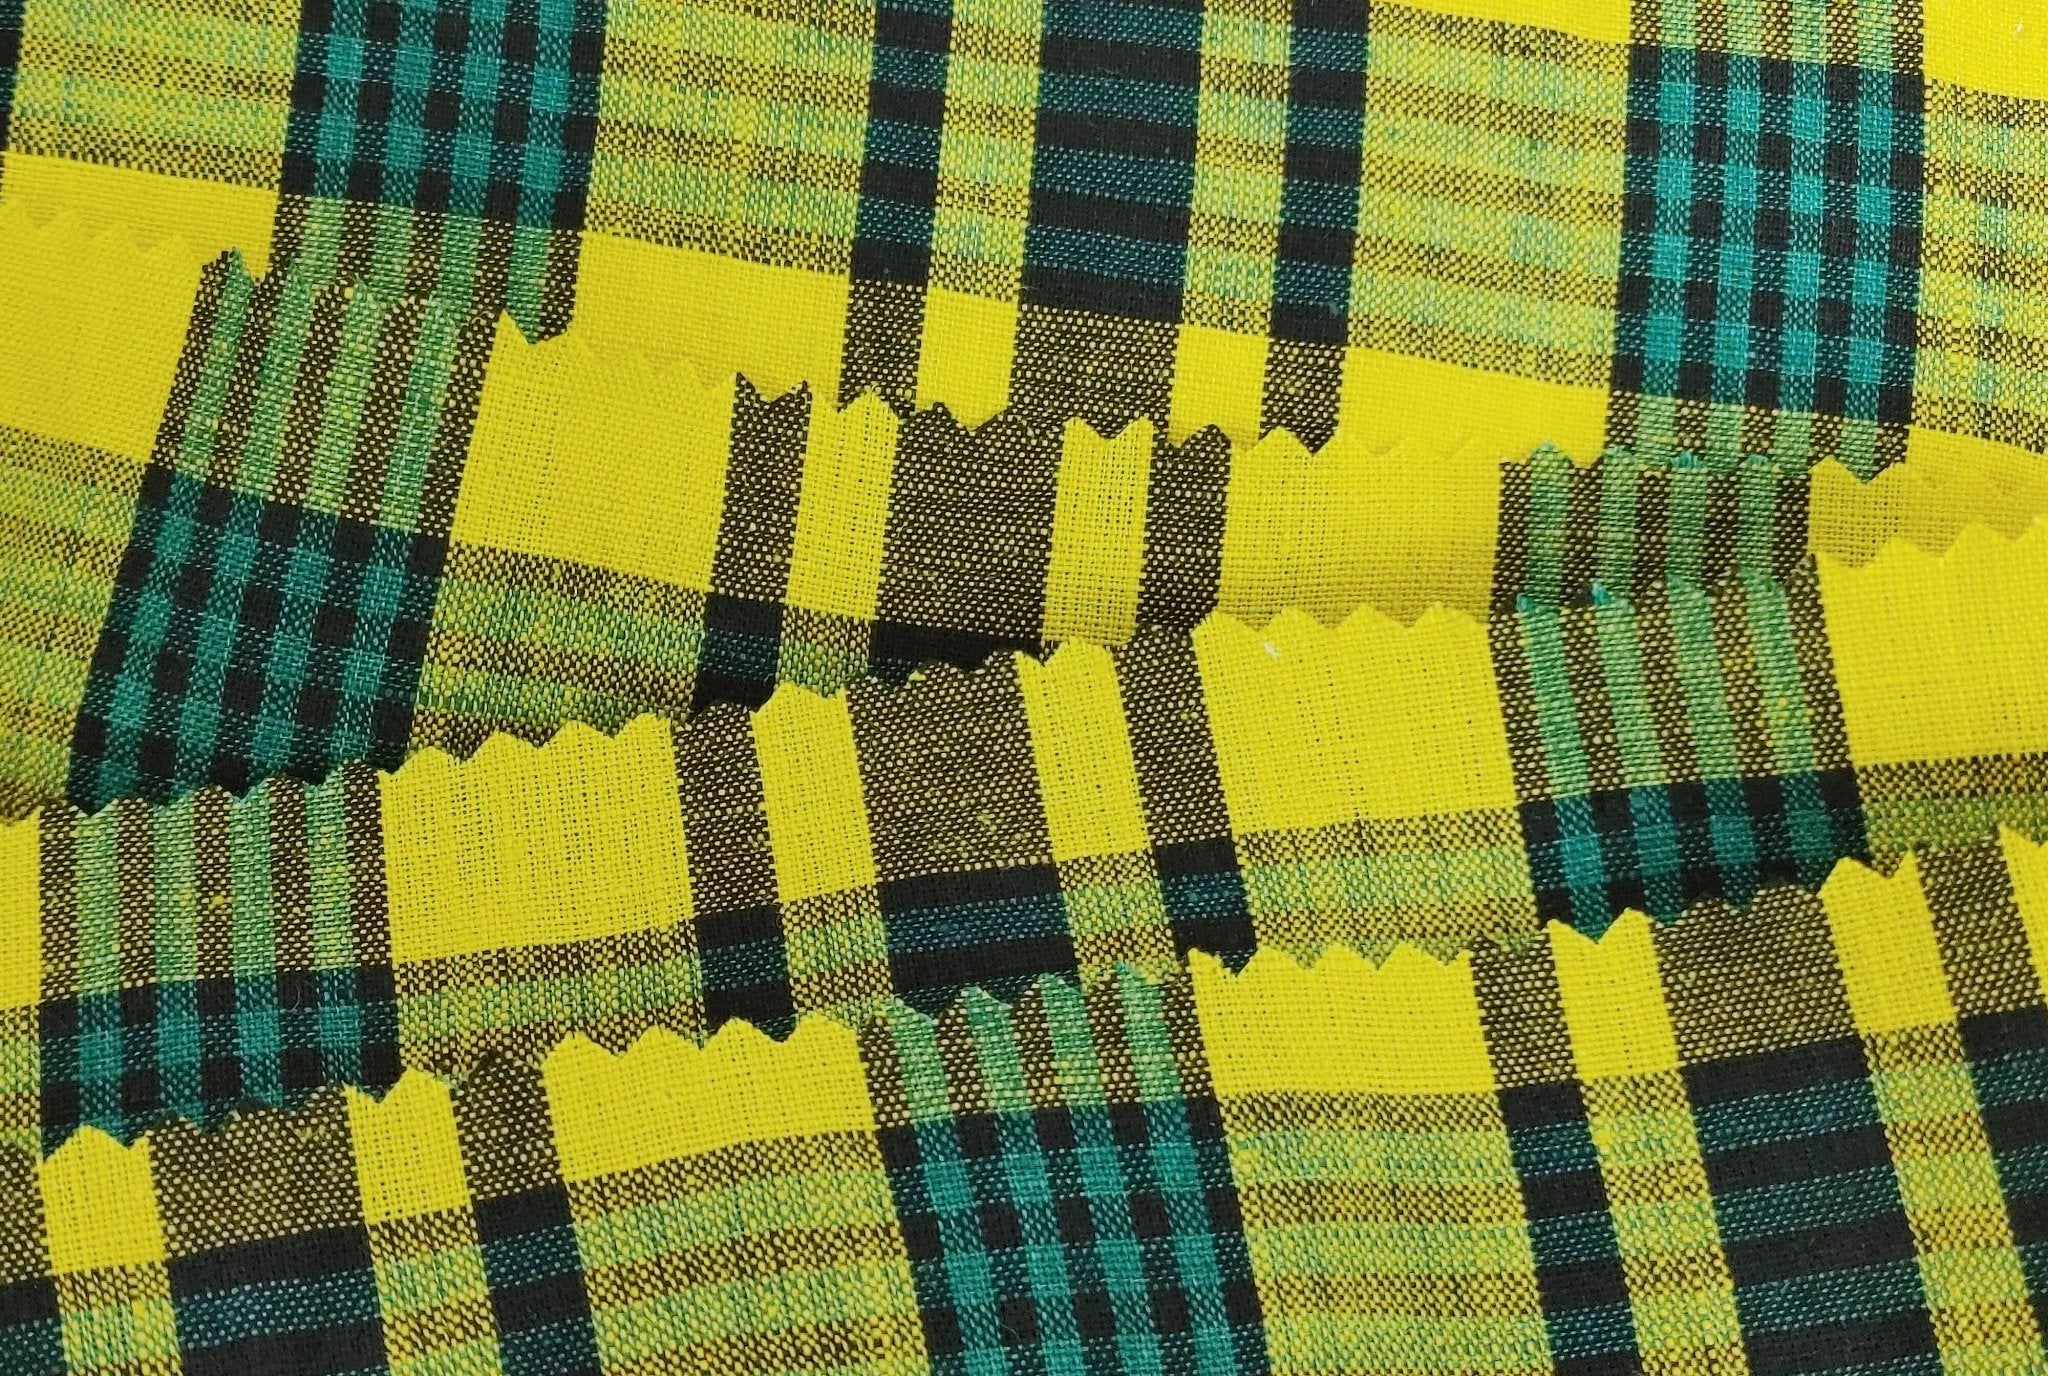 Sunny Fields: Yellow, Black and Green Linen Cotton Plaid Fabric 6619 - The Linen Lab - Yellow